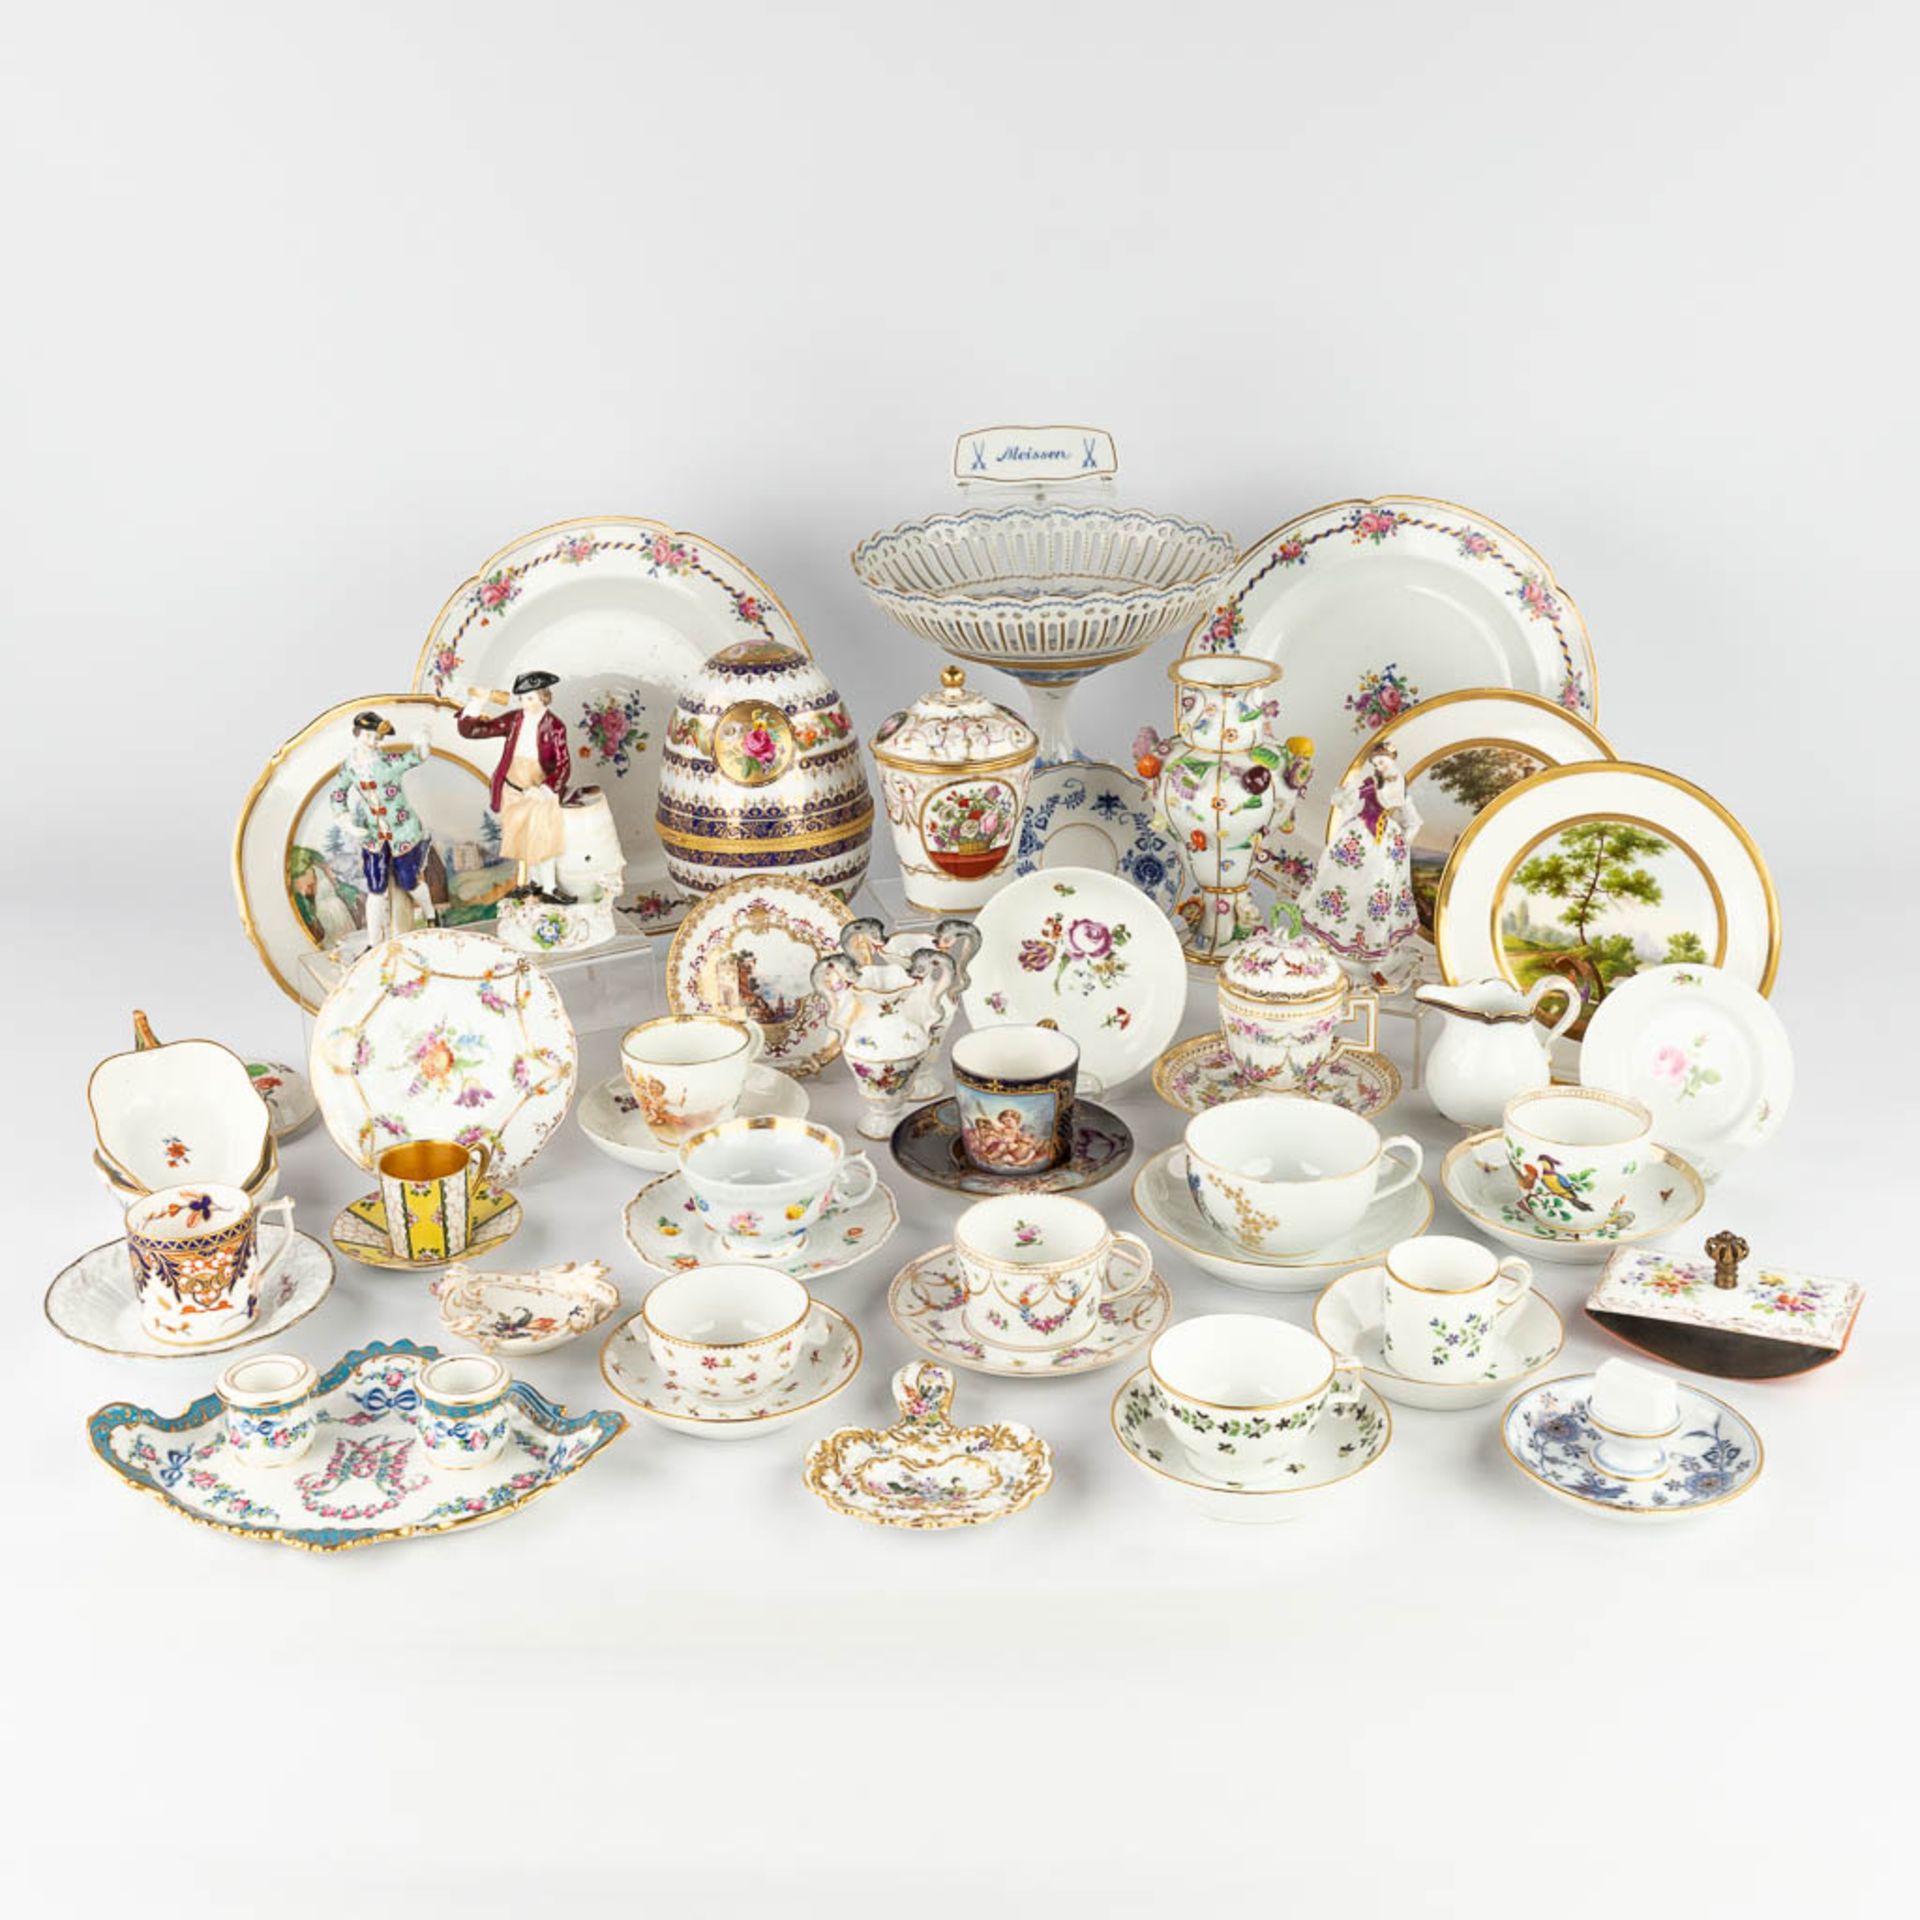 A large collection of porcelain items and table accessories of multiple marks. 19th and 20th C. (H:2